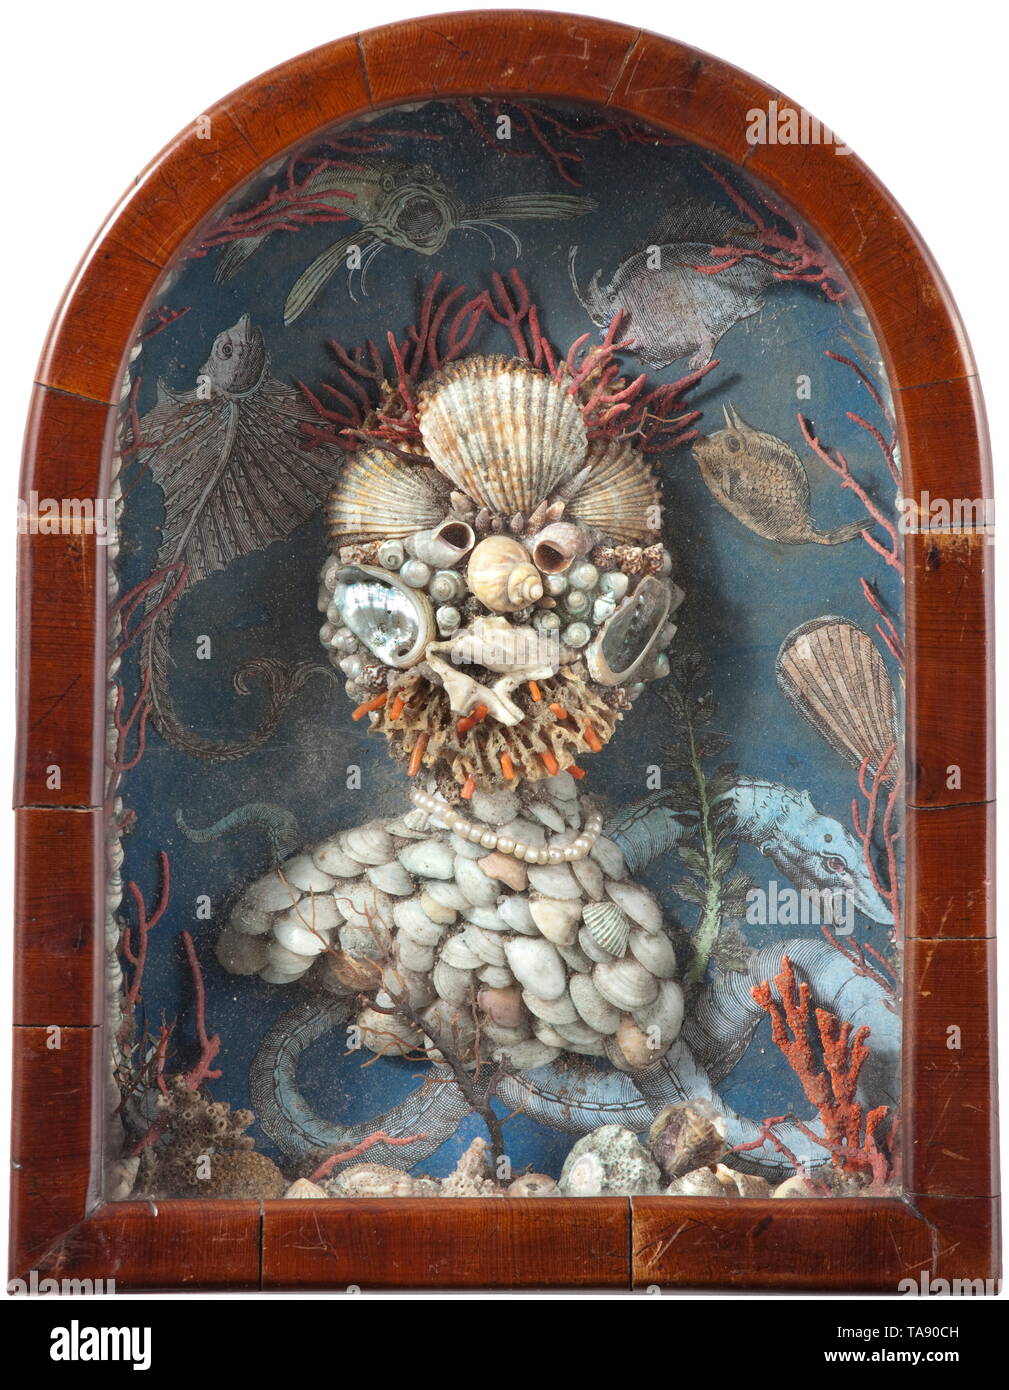 A German or English shell collage in the style of Giuseppe Arcimboldo, 1st half of the 19th century A collage of shells depicting the bust of a bearded man, a fine string of pearls around his neck. The box frame lined with coloured decorative paper with maritime motifs and embellished with shells and branches of coral. The arched frame with glass and made of walnut, the back covered in decorative paper. Old suspension ring on the back. Dimensions 24 x 18.5 cm. historic, historical, handicrafts, handcraft, craft, object, objects, stills, clipping,, Additional-Rights-Clearance-Info-Not-Available Stock Photo